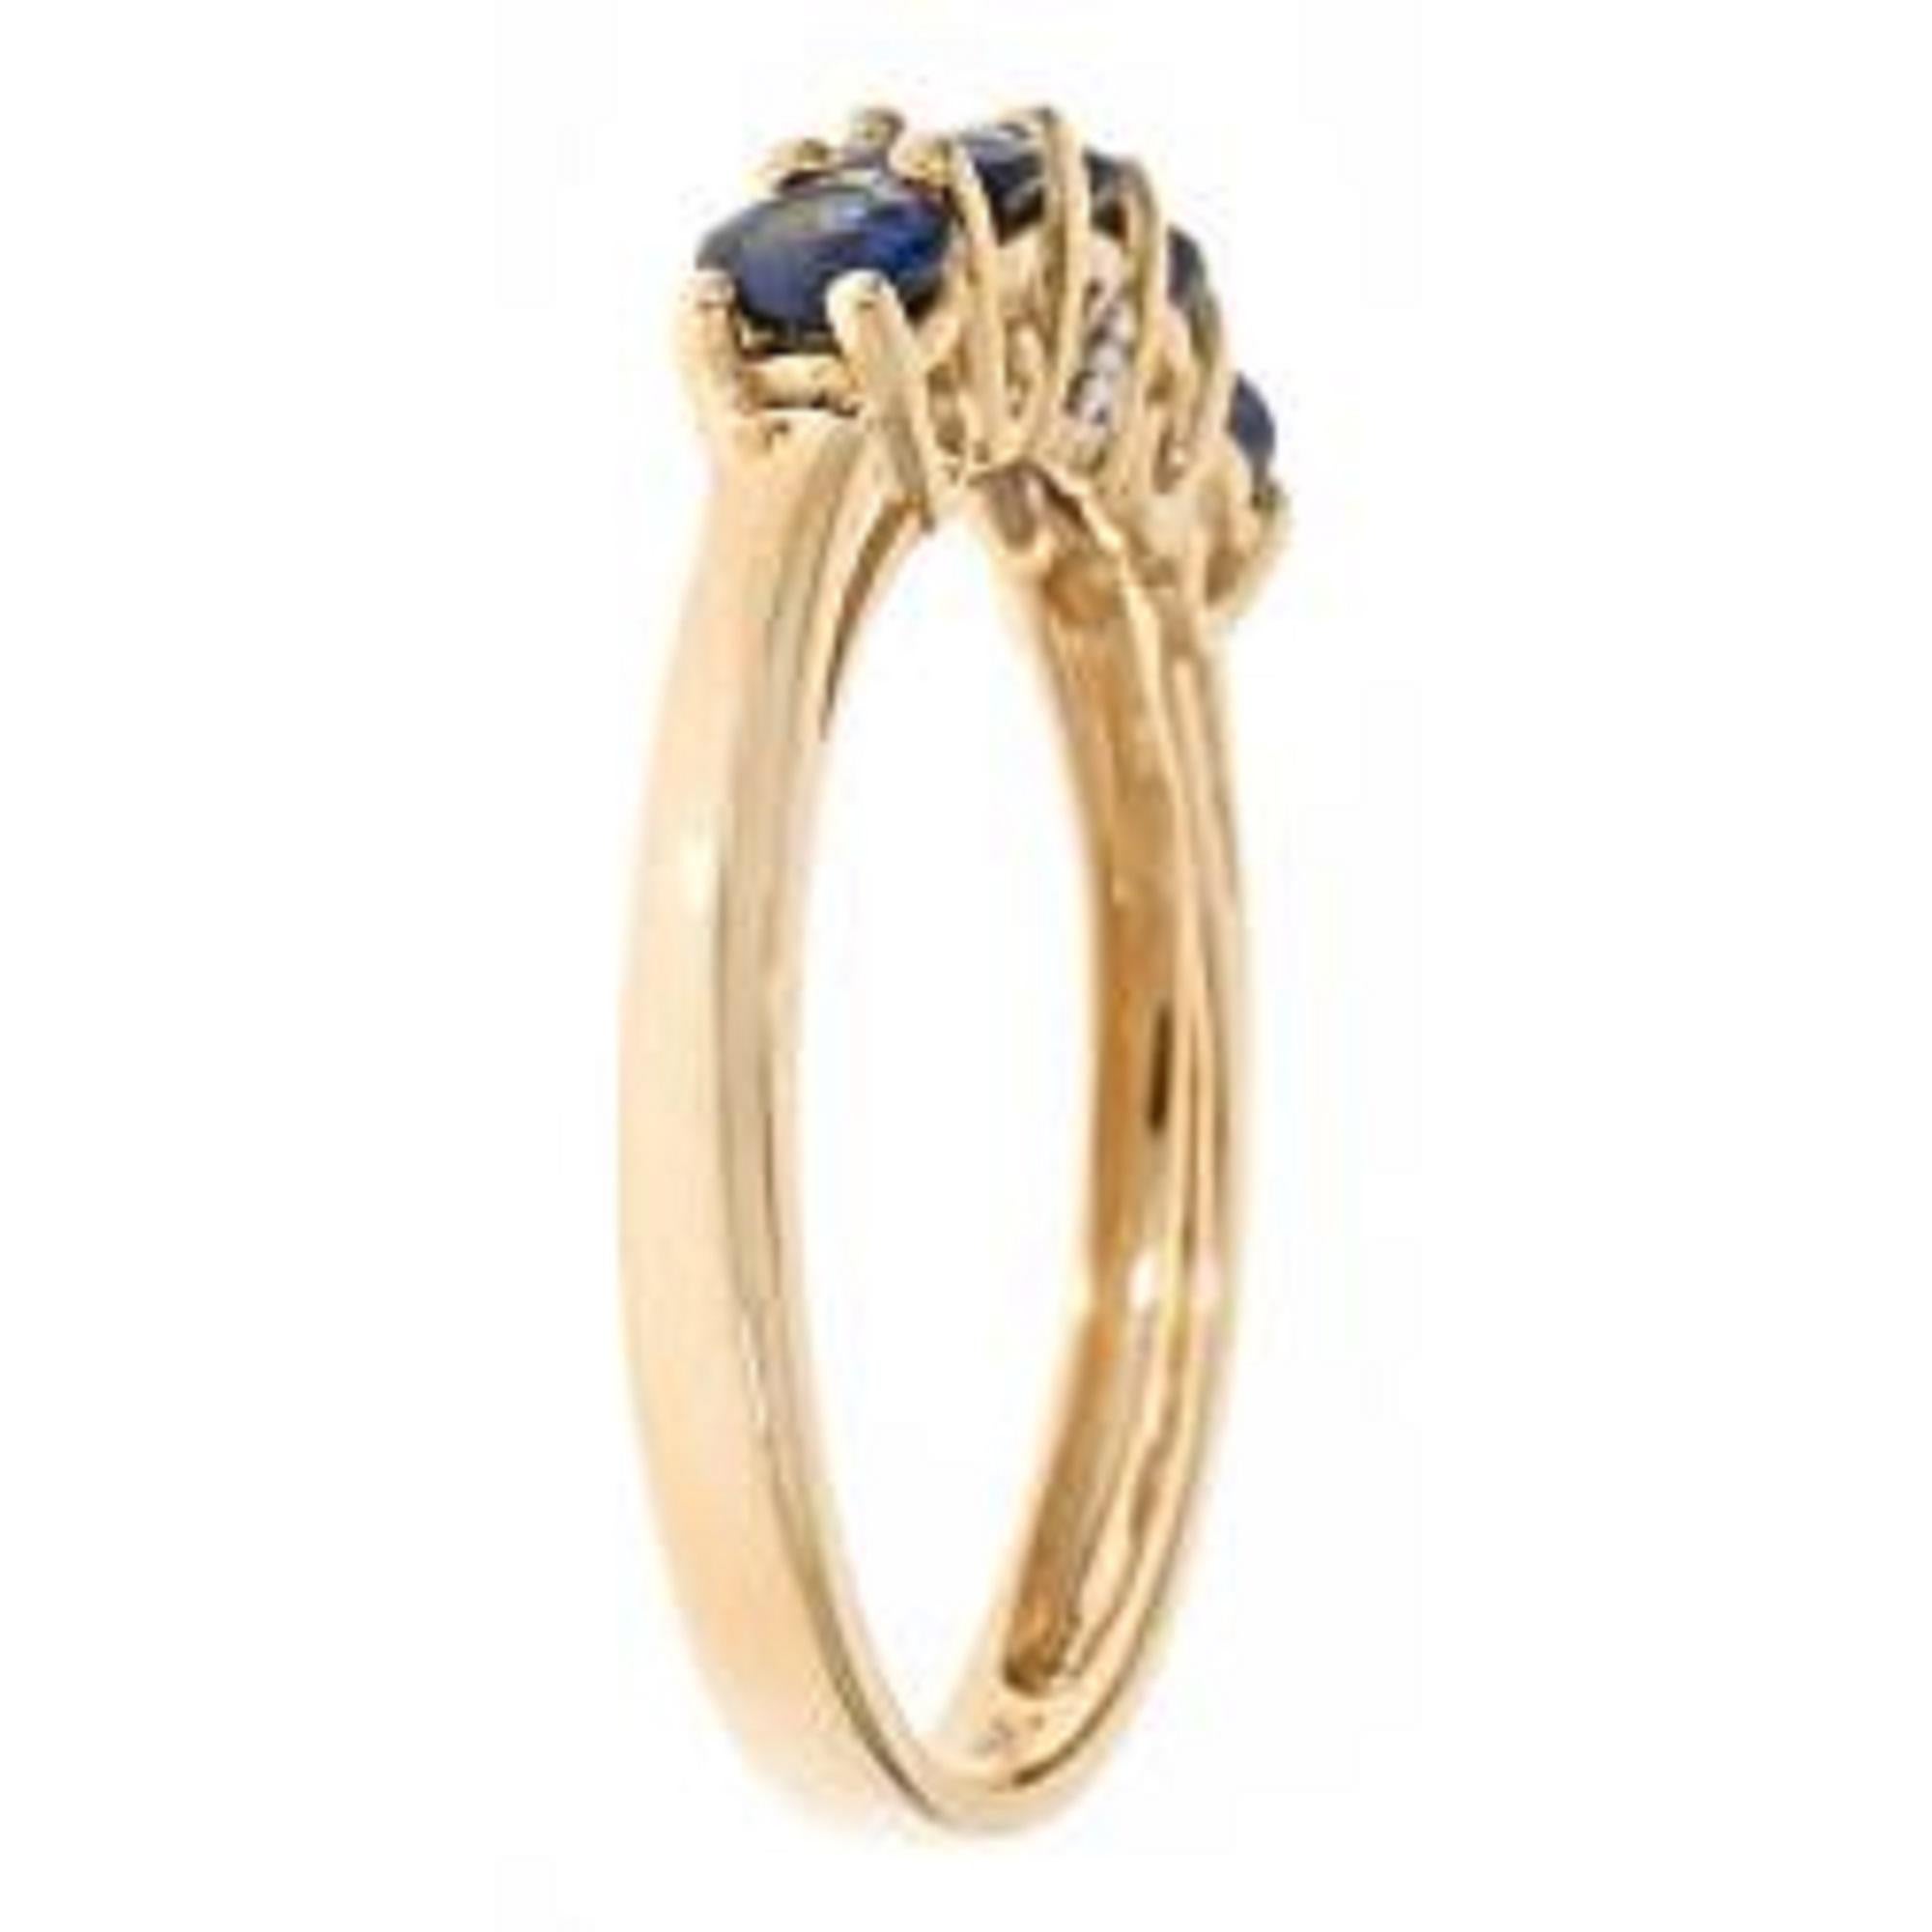 Stunning, timeless and classy eternity Unique ring. Decorate yourself in luxury with this The Loupe Club ring. This ring is made up of 3.5MM Round-Cut Prong Setting Blue Sapphire (5 pcs) 1.13 Carat and Round-Cut Prong Setting white Diamond (2 pcs)